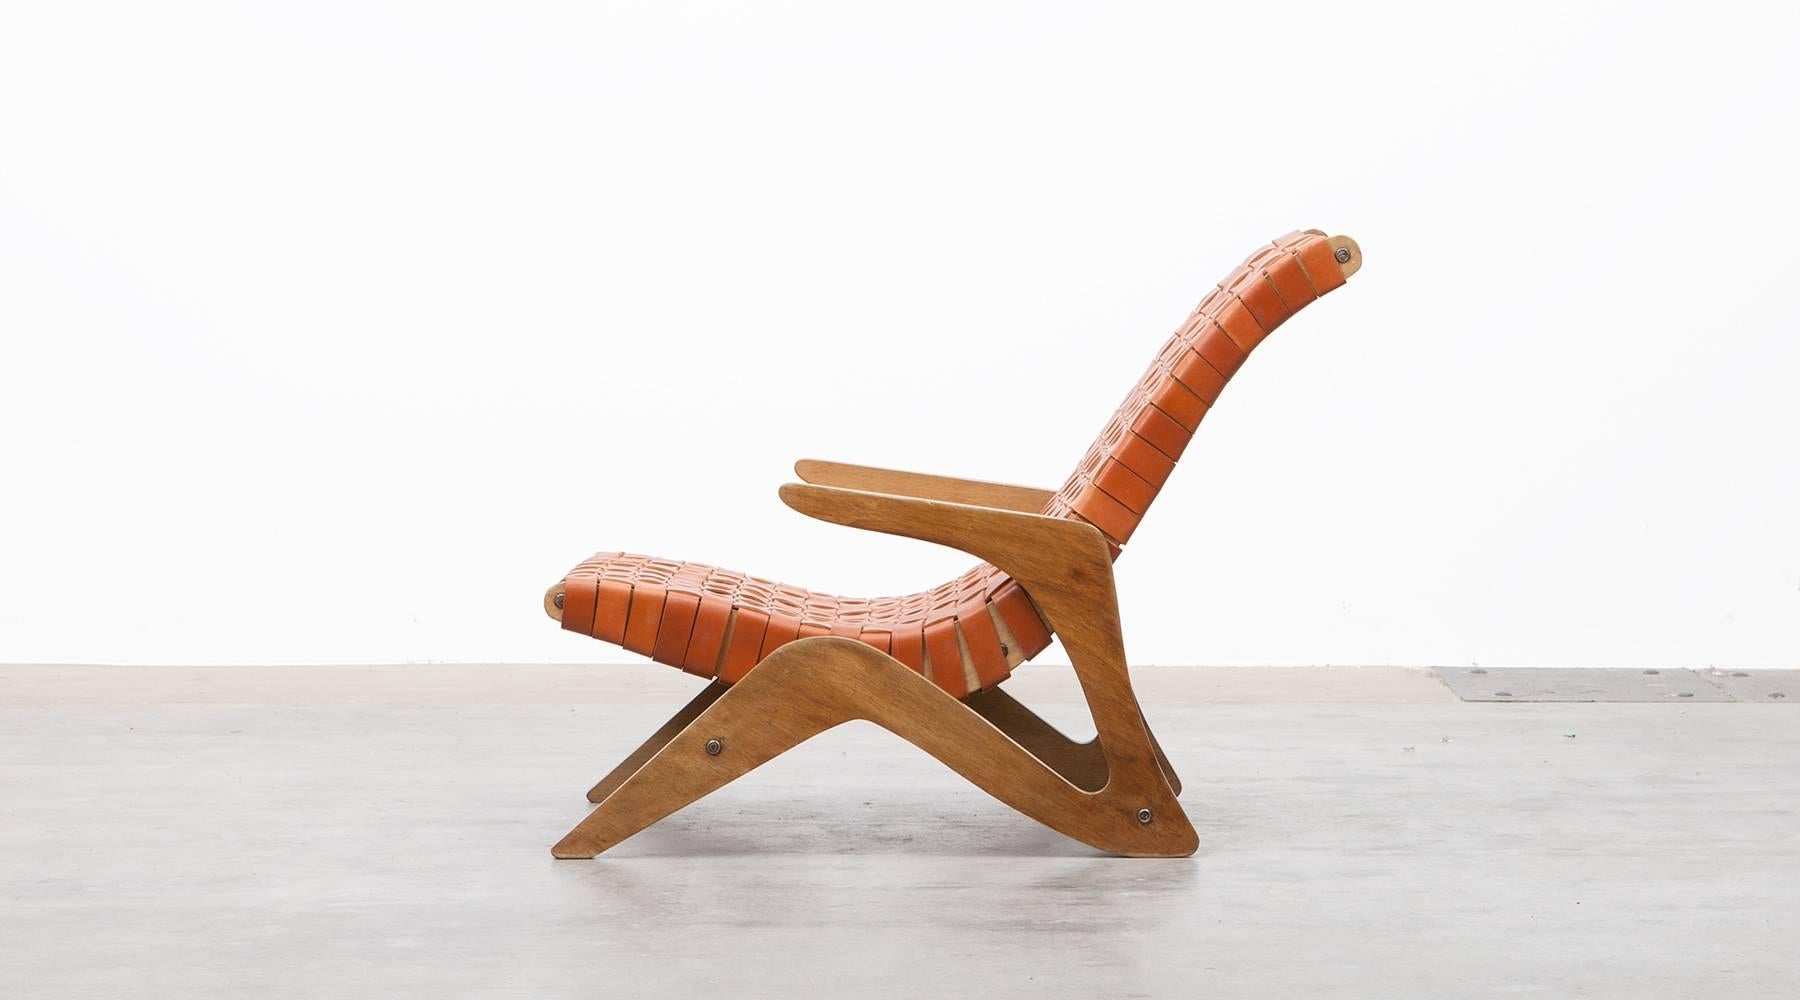 Lounge chair, brown leather, wood, Jose Janine Caldas, Brazil 1950.

This beautiful lounge chair was designed by Jose Zanine Caldas in 1950. The organic shape matches perfect to the pattern of the woven leather stripes. It is an example of Brazilian